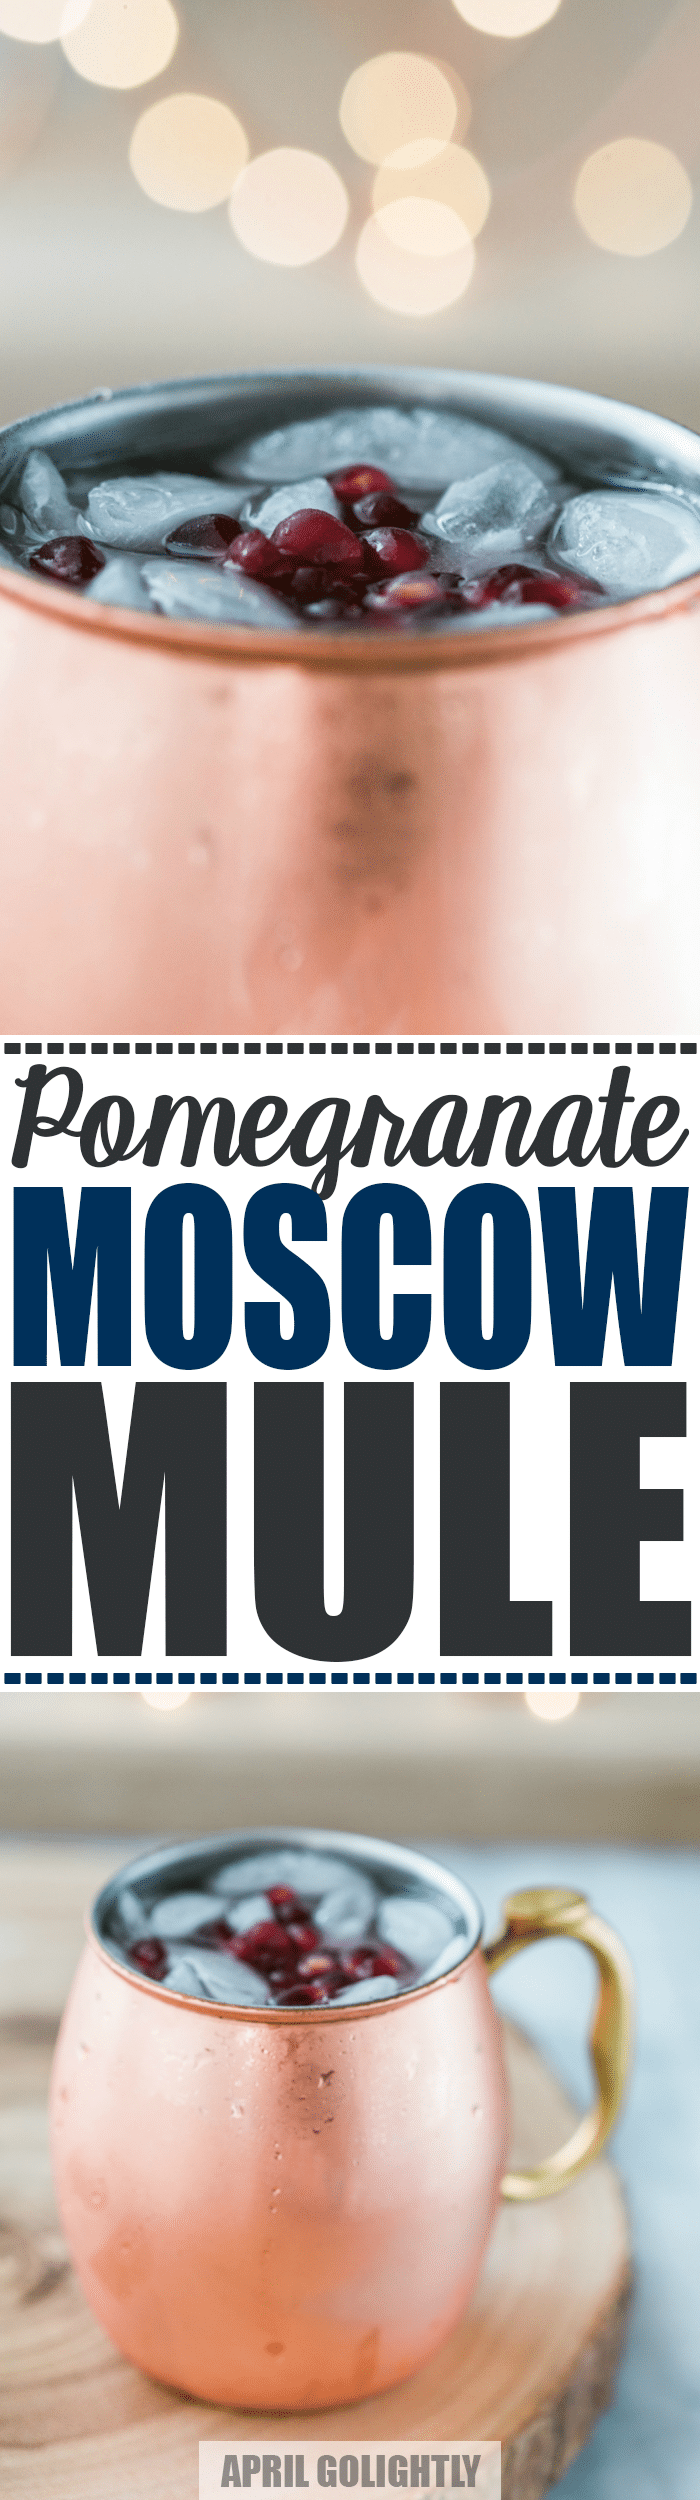 pomegranate-moscow-mule-1